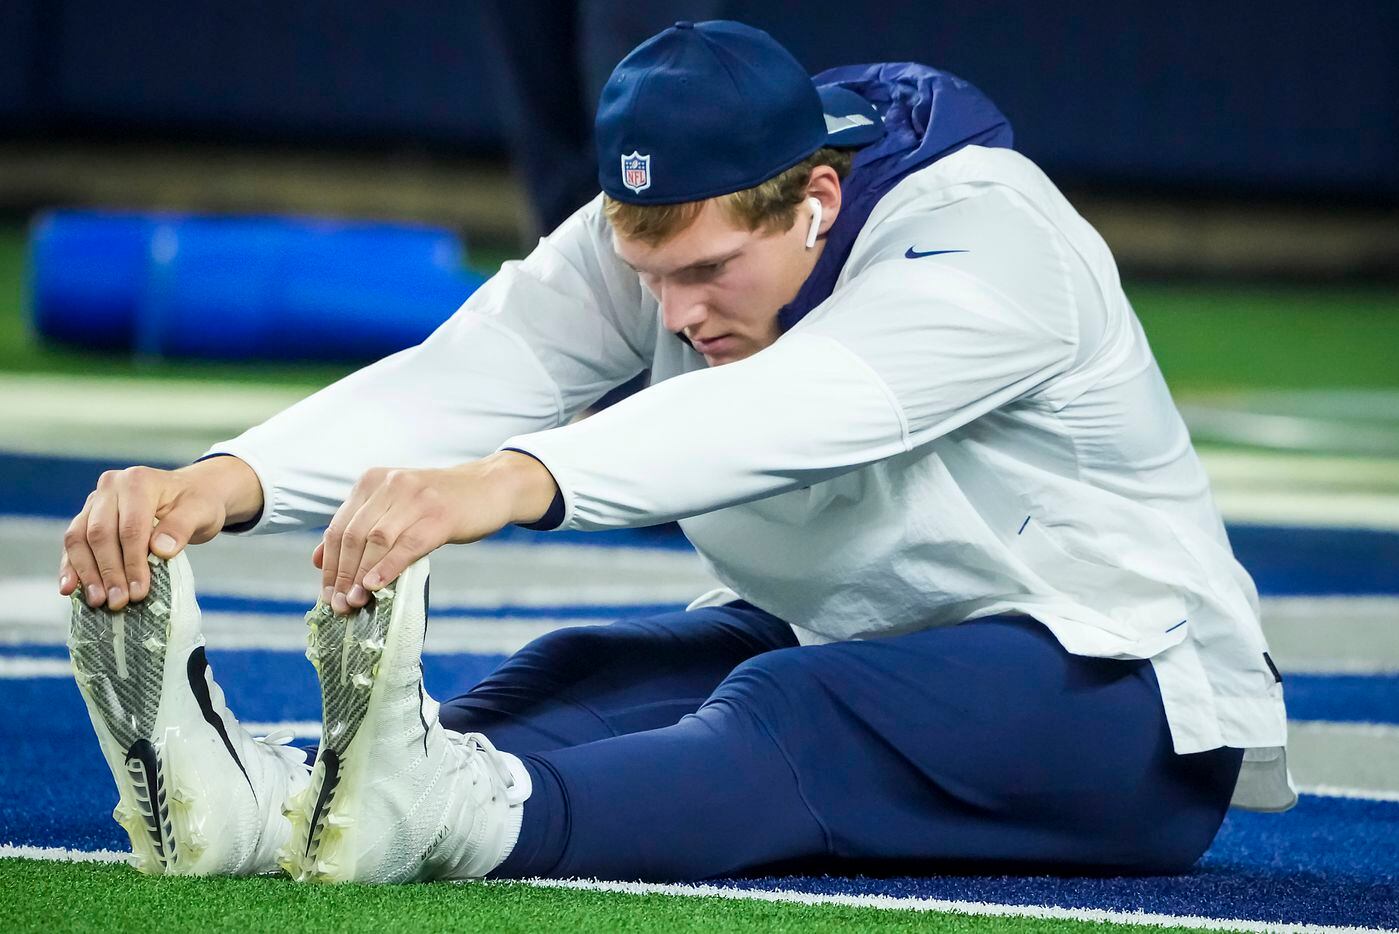 Dallas Cowboys outside linebacker Leighton Vander Esch stretches before an NFL football game against the Washington Football Team at AT&T Stadium on Sunday, Dec. 26, 2021, in Arlington.